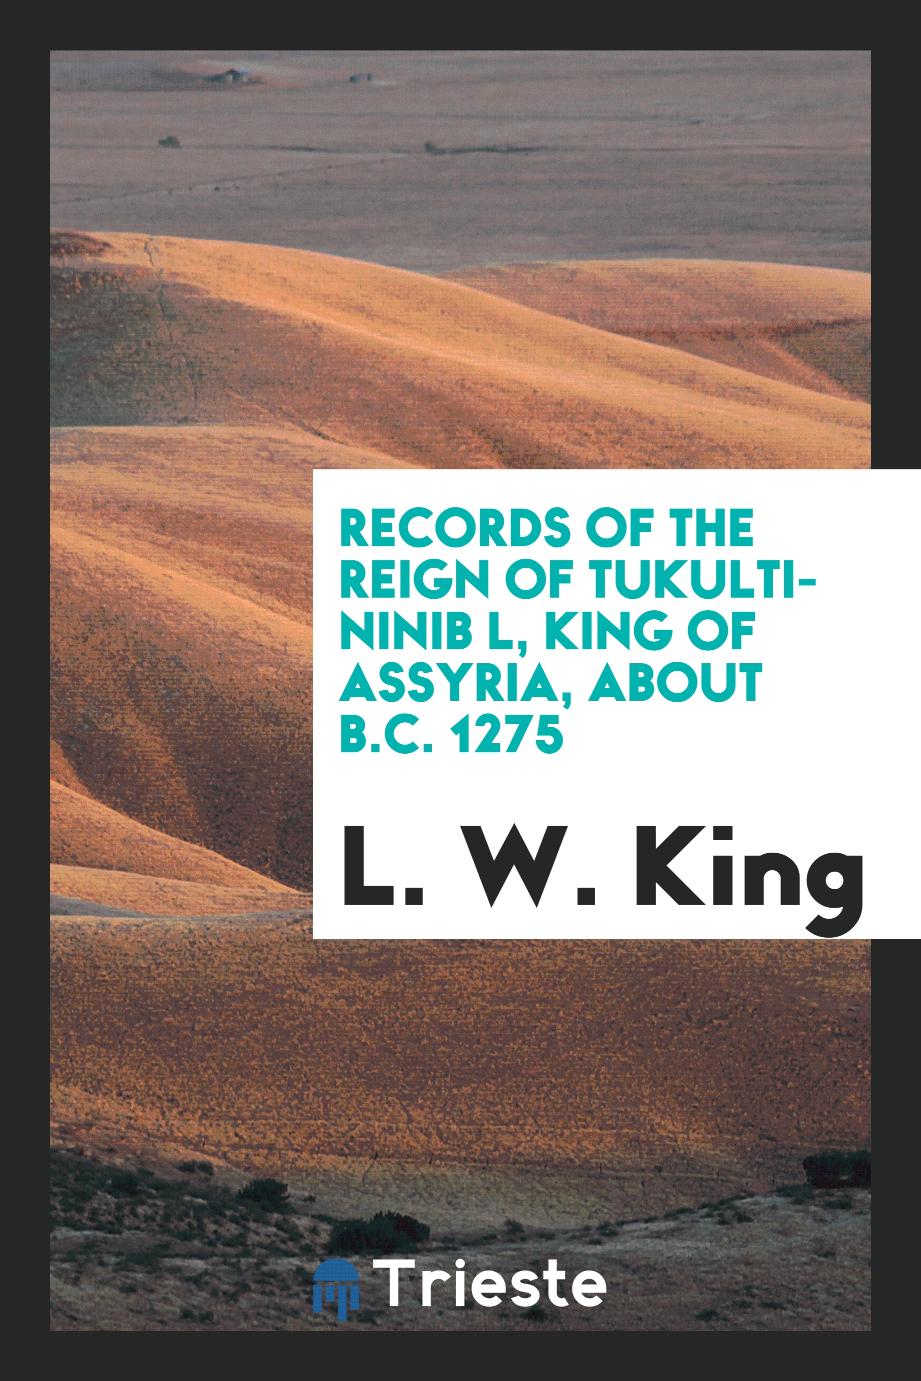 Records of the reign of Tukulti-Ninib l, King of Assyria, about B.C. 1275